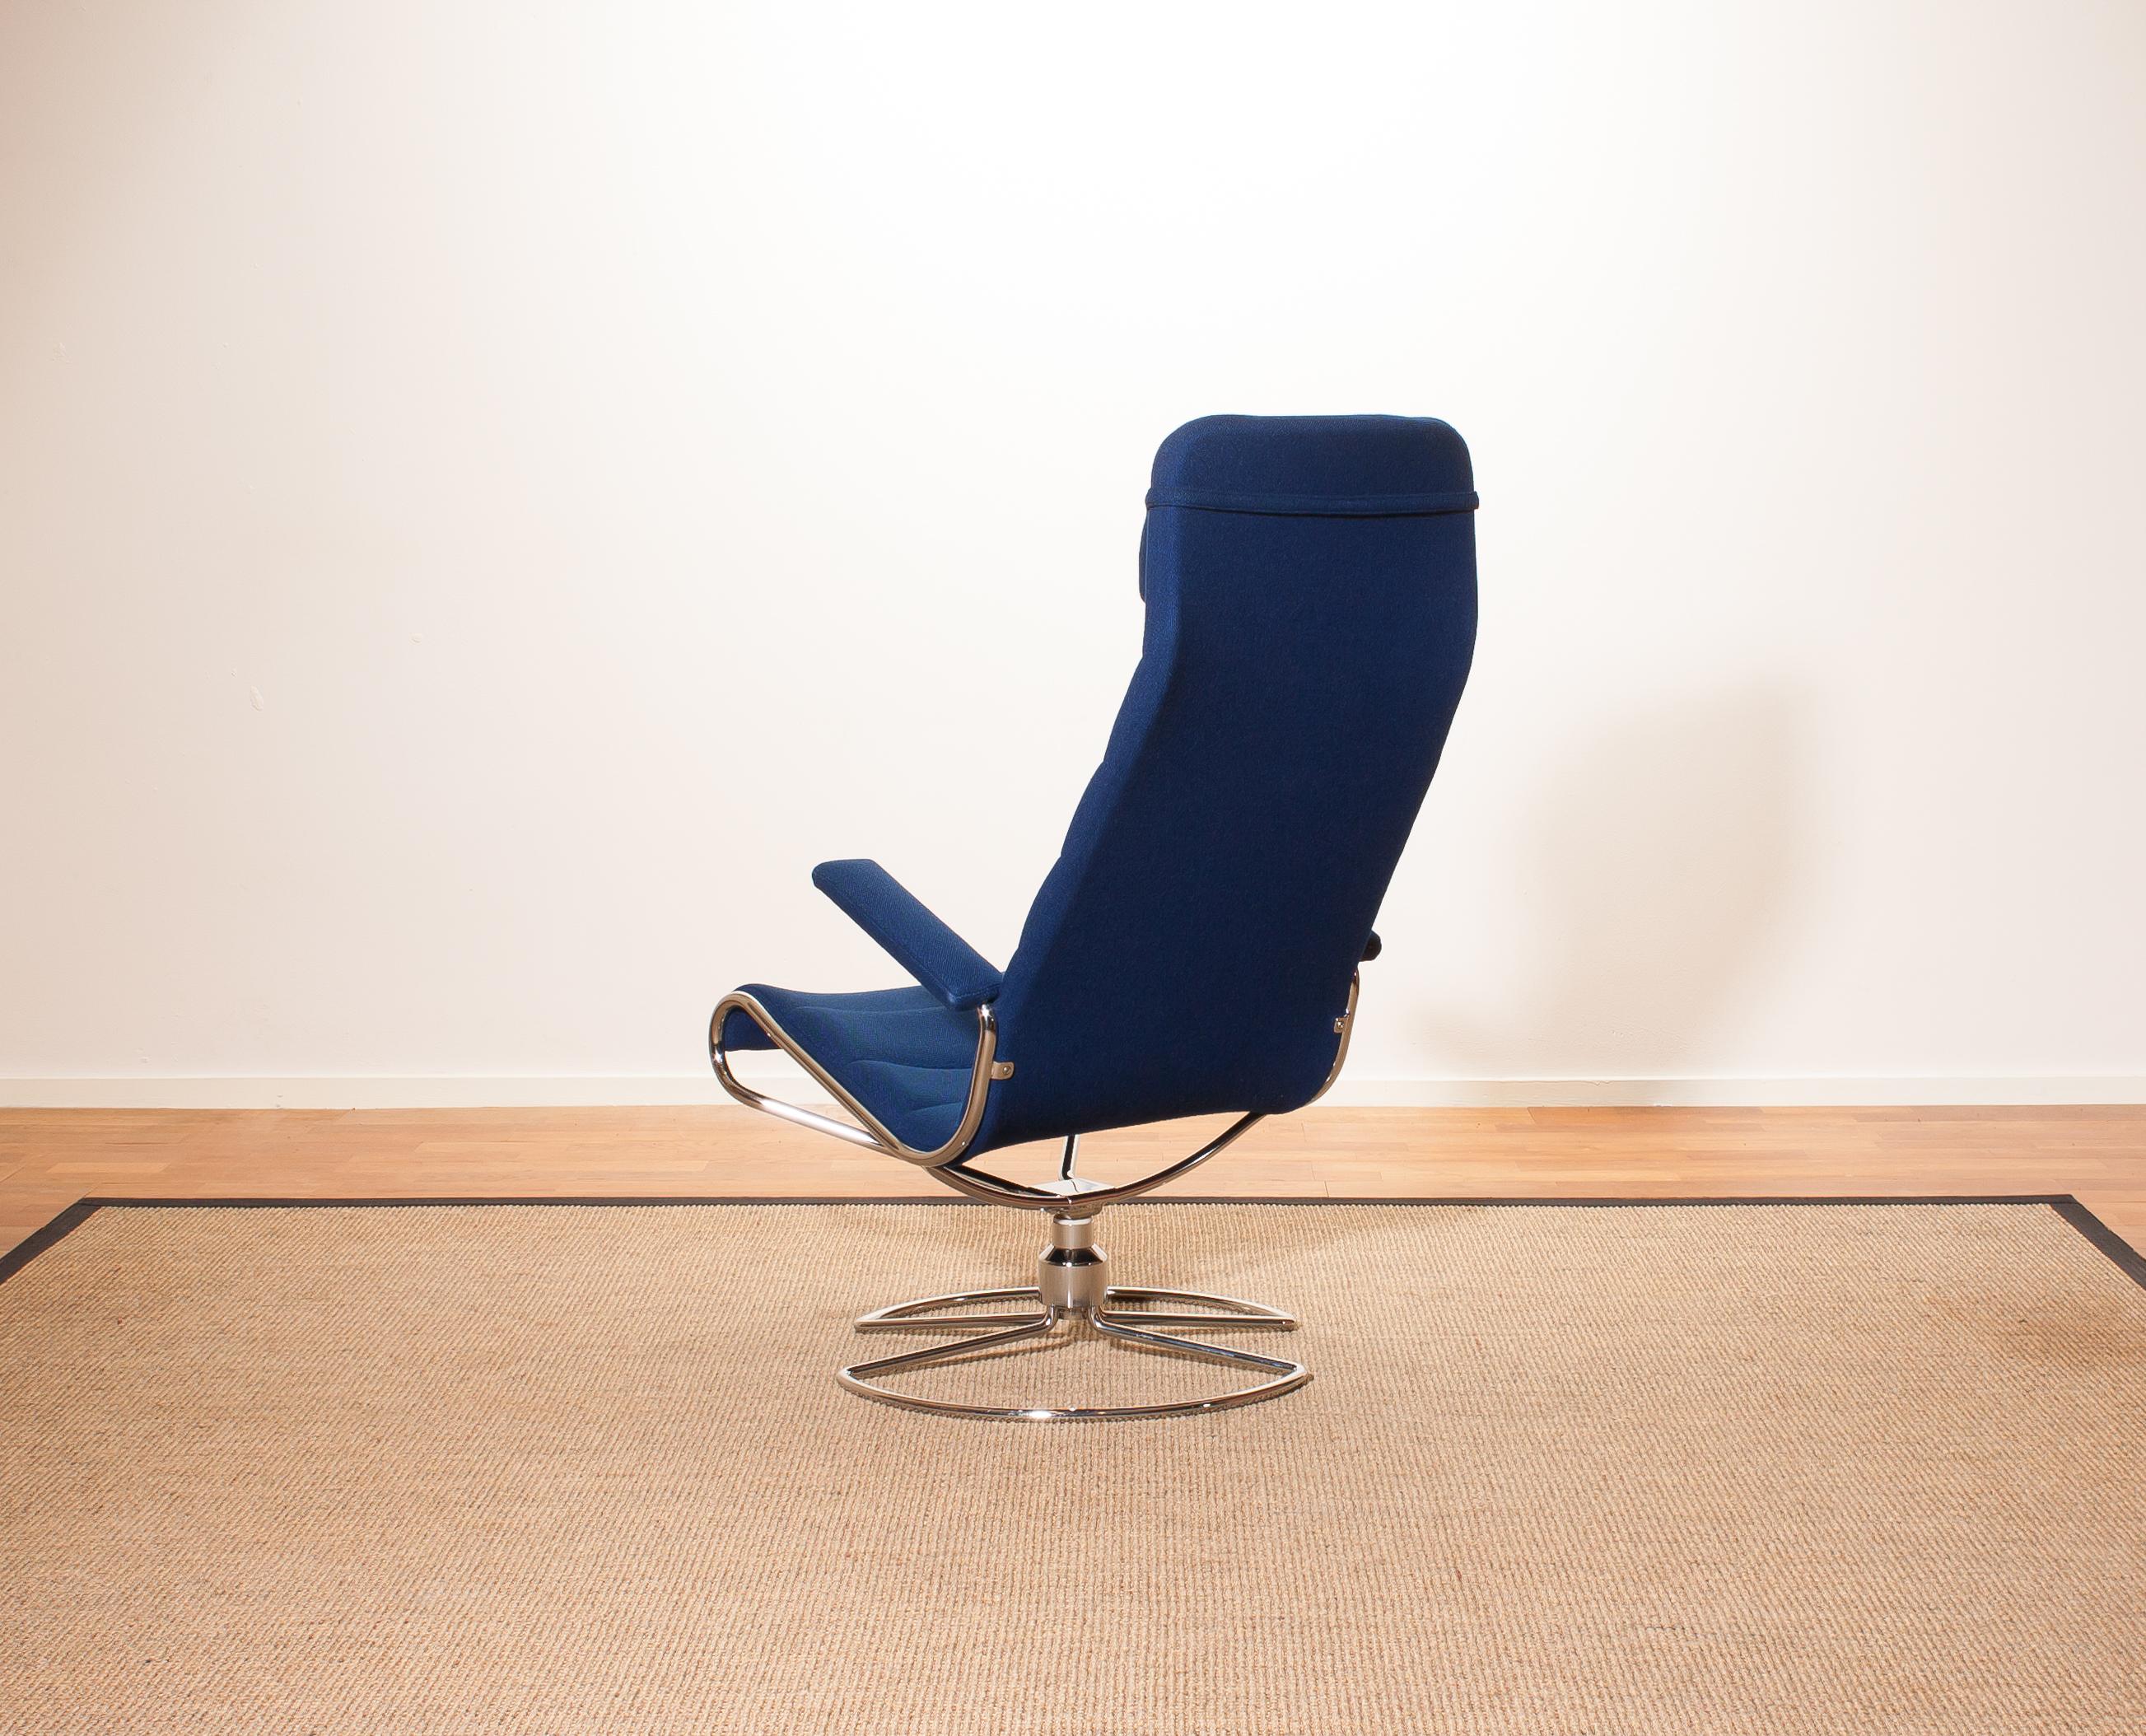 Beautiful 'Minister' chair designed by Bruno Mathsson.
It is upholstered with a royal blue wooden fabric mounted on a swivel base of tubular chromed steel.
The chair is in very good condition.
Period 1980s.
Dimensions: H. 109 cm x W. 60 cm x D.